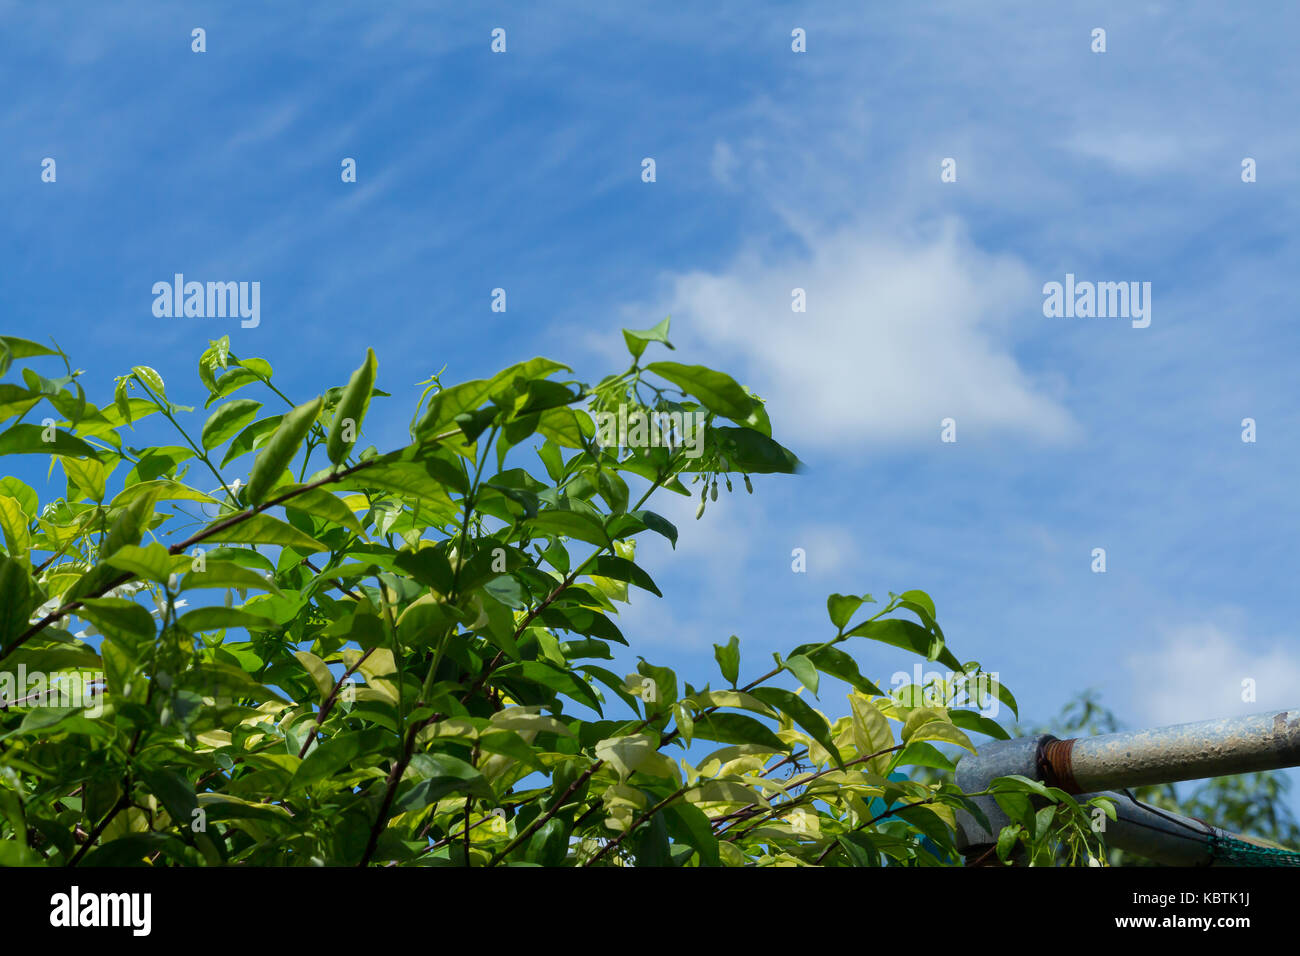 Green plant against the blue sky in good weather days Stock Photo